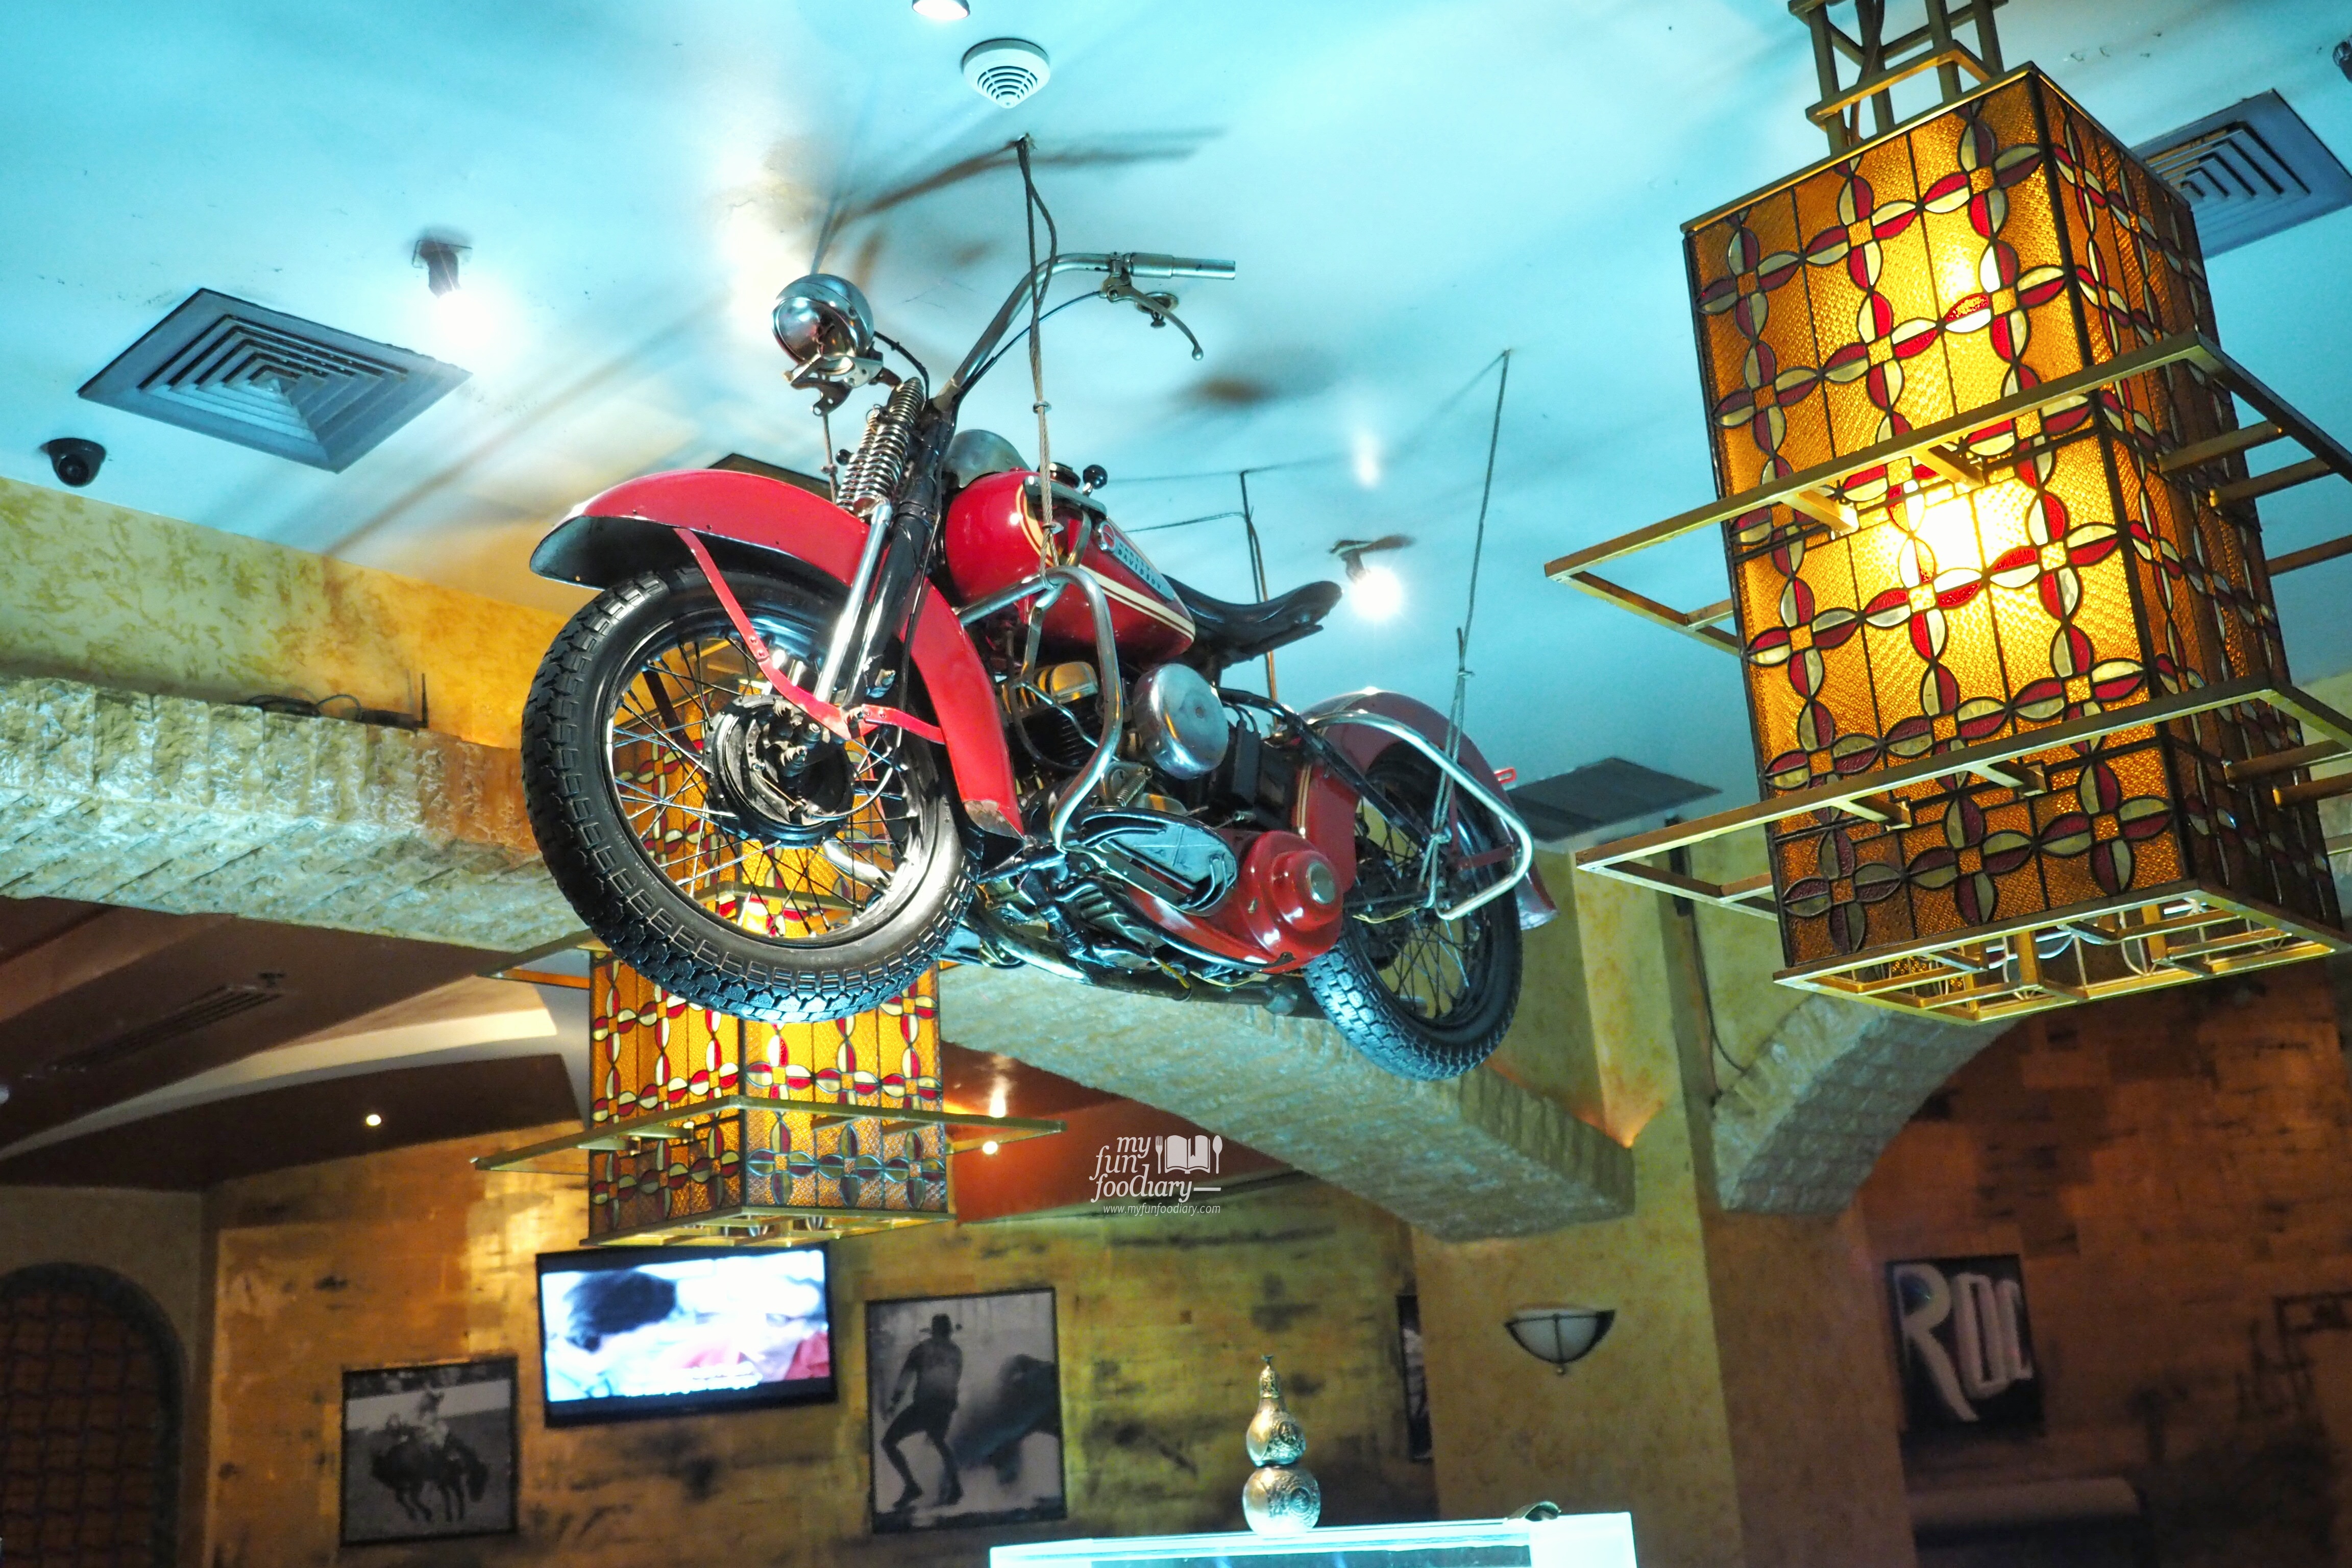 Cool Motorcycle at Desperados by Myfunfoodiary